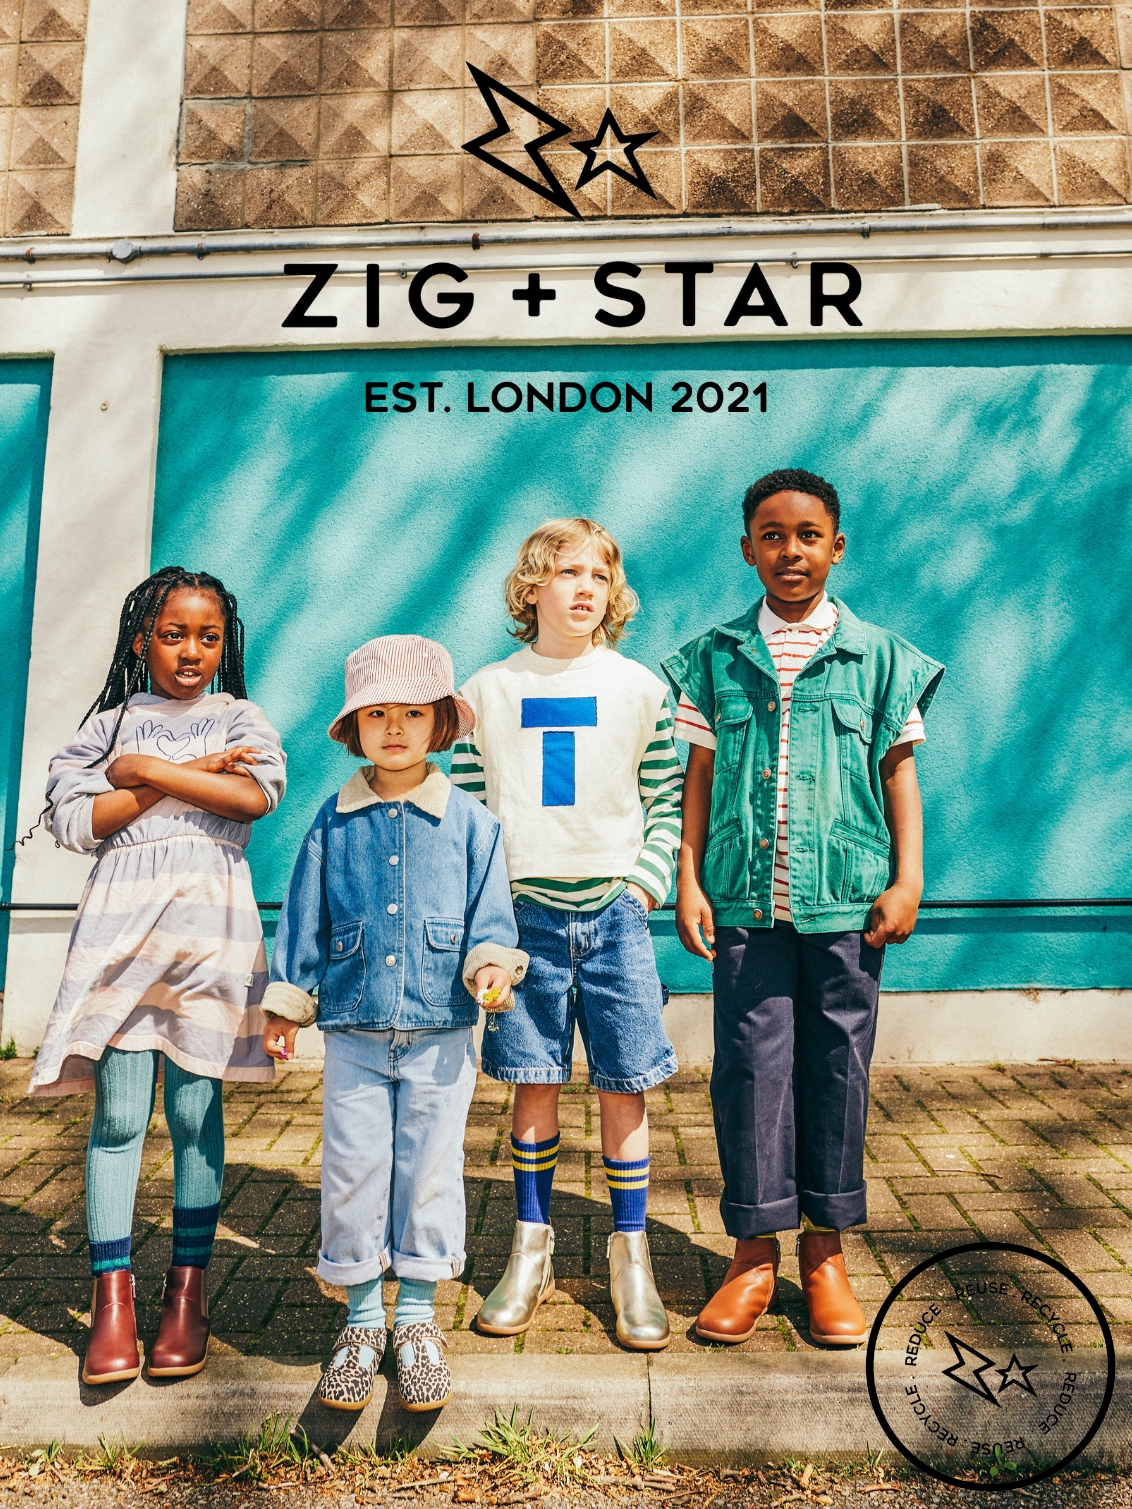 4 kids standing on pavement wearing ZIG+STAR KIDS shoes and boots